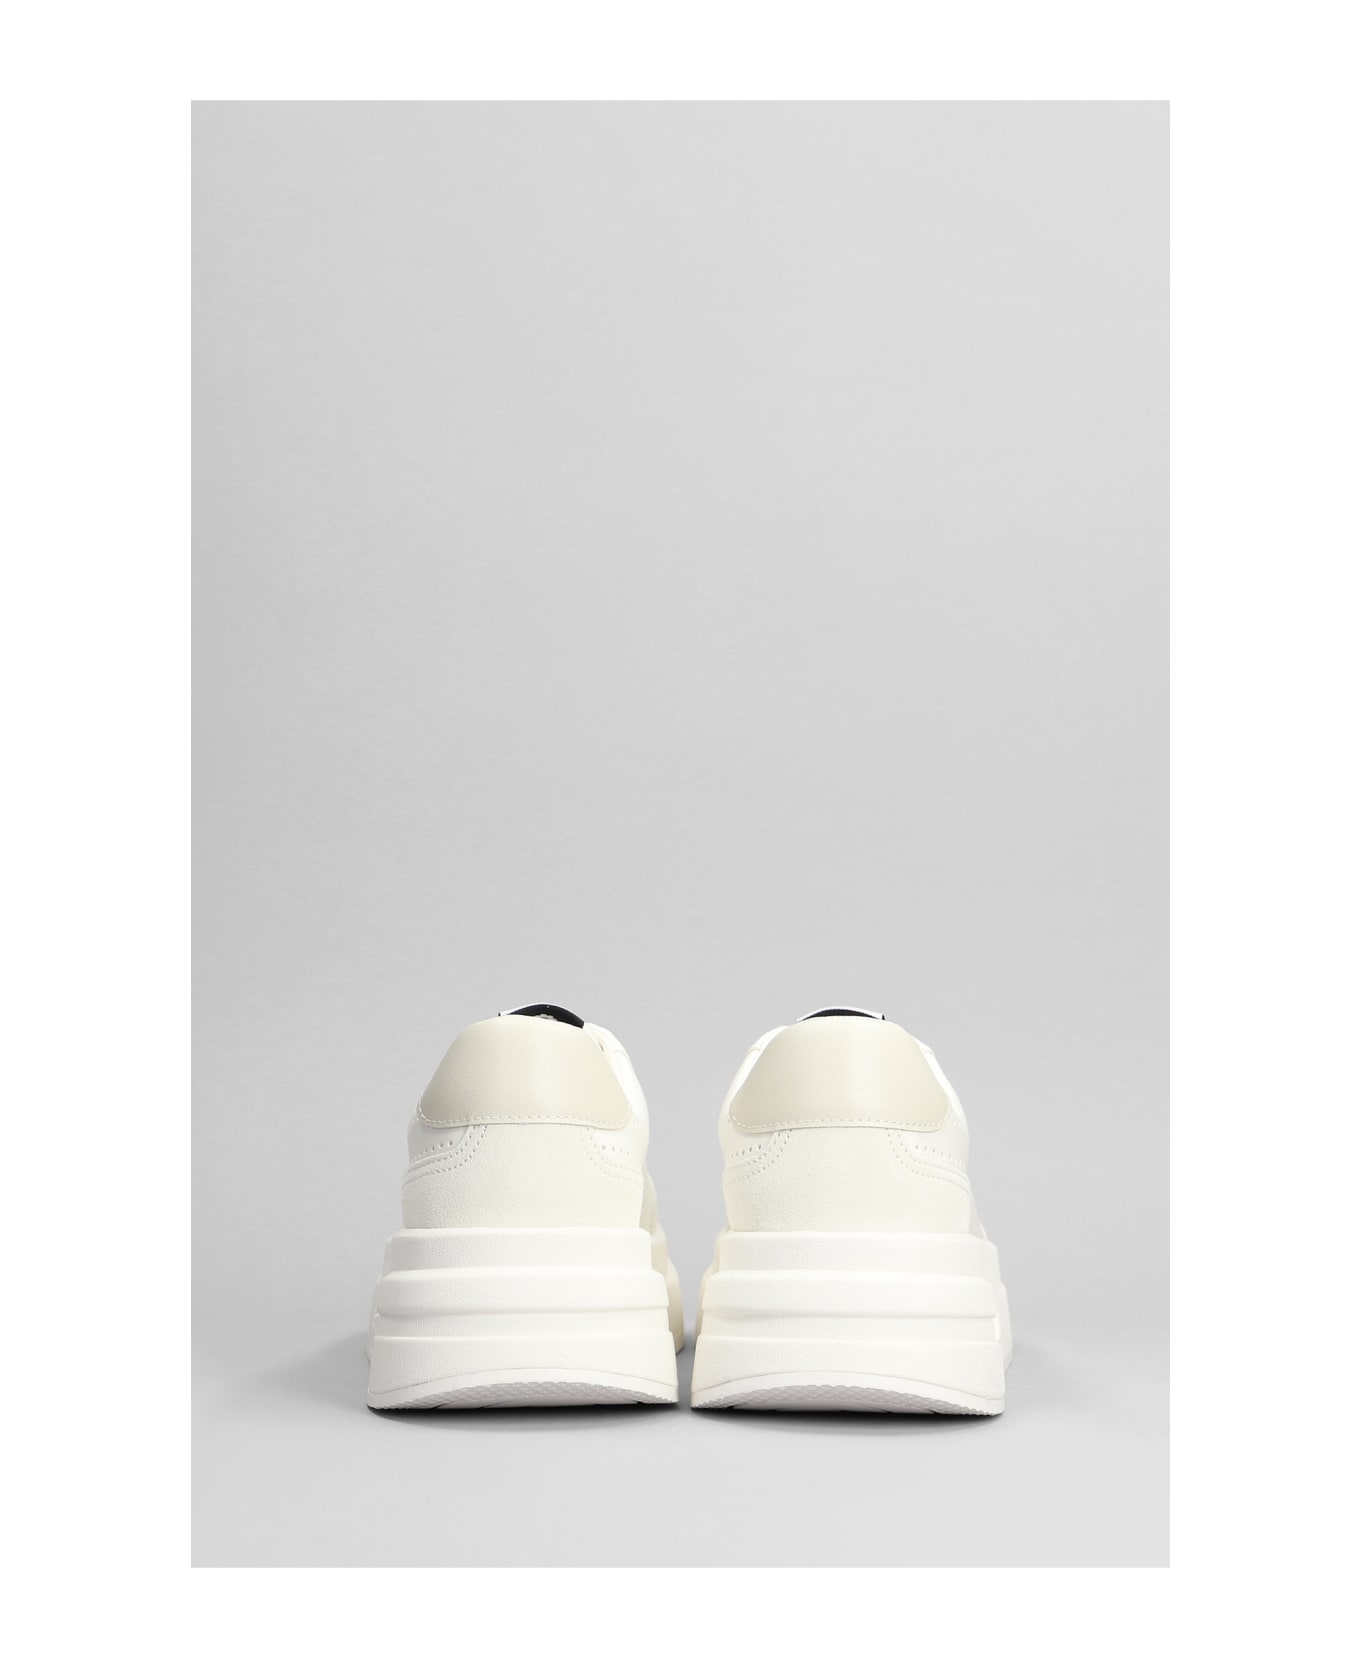 Ash Impuls Bis Sneakers In White Leather - white ウェッジシューズ